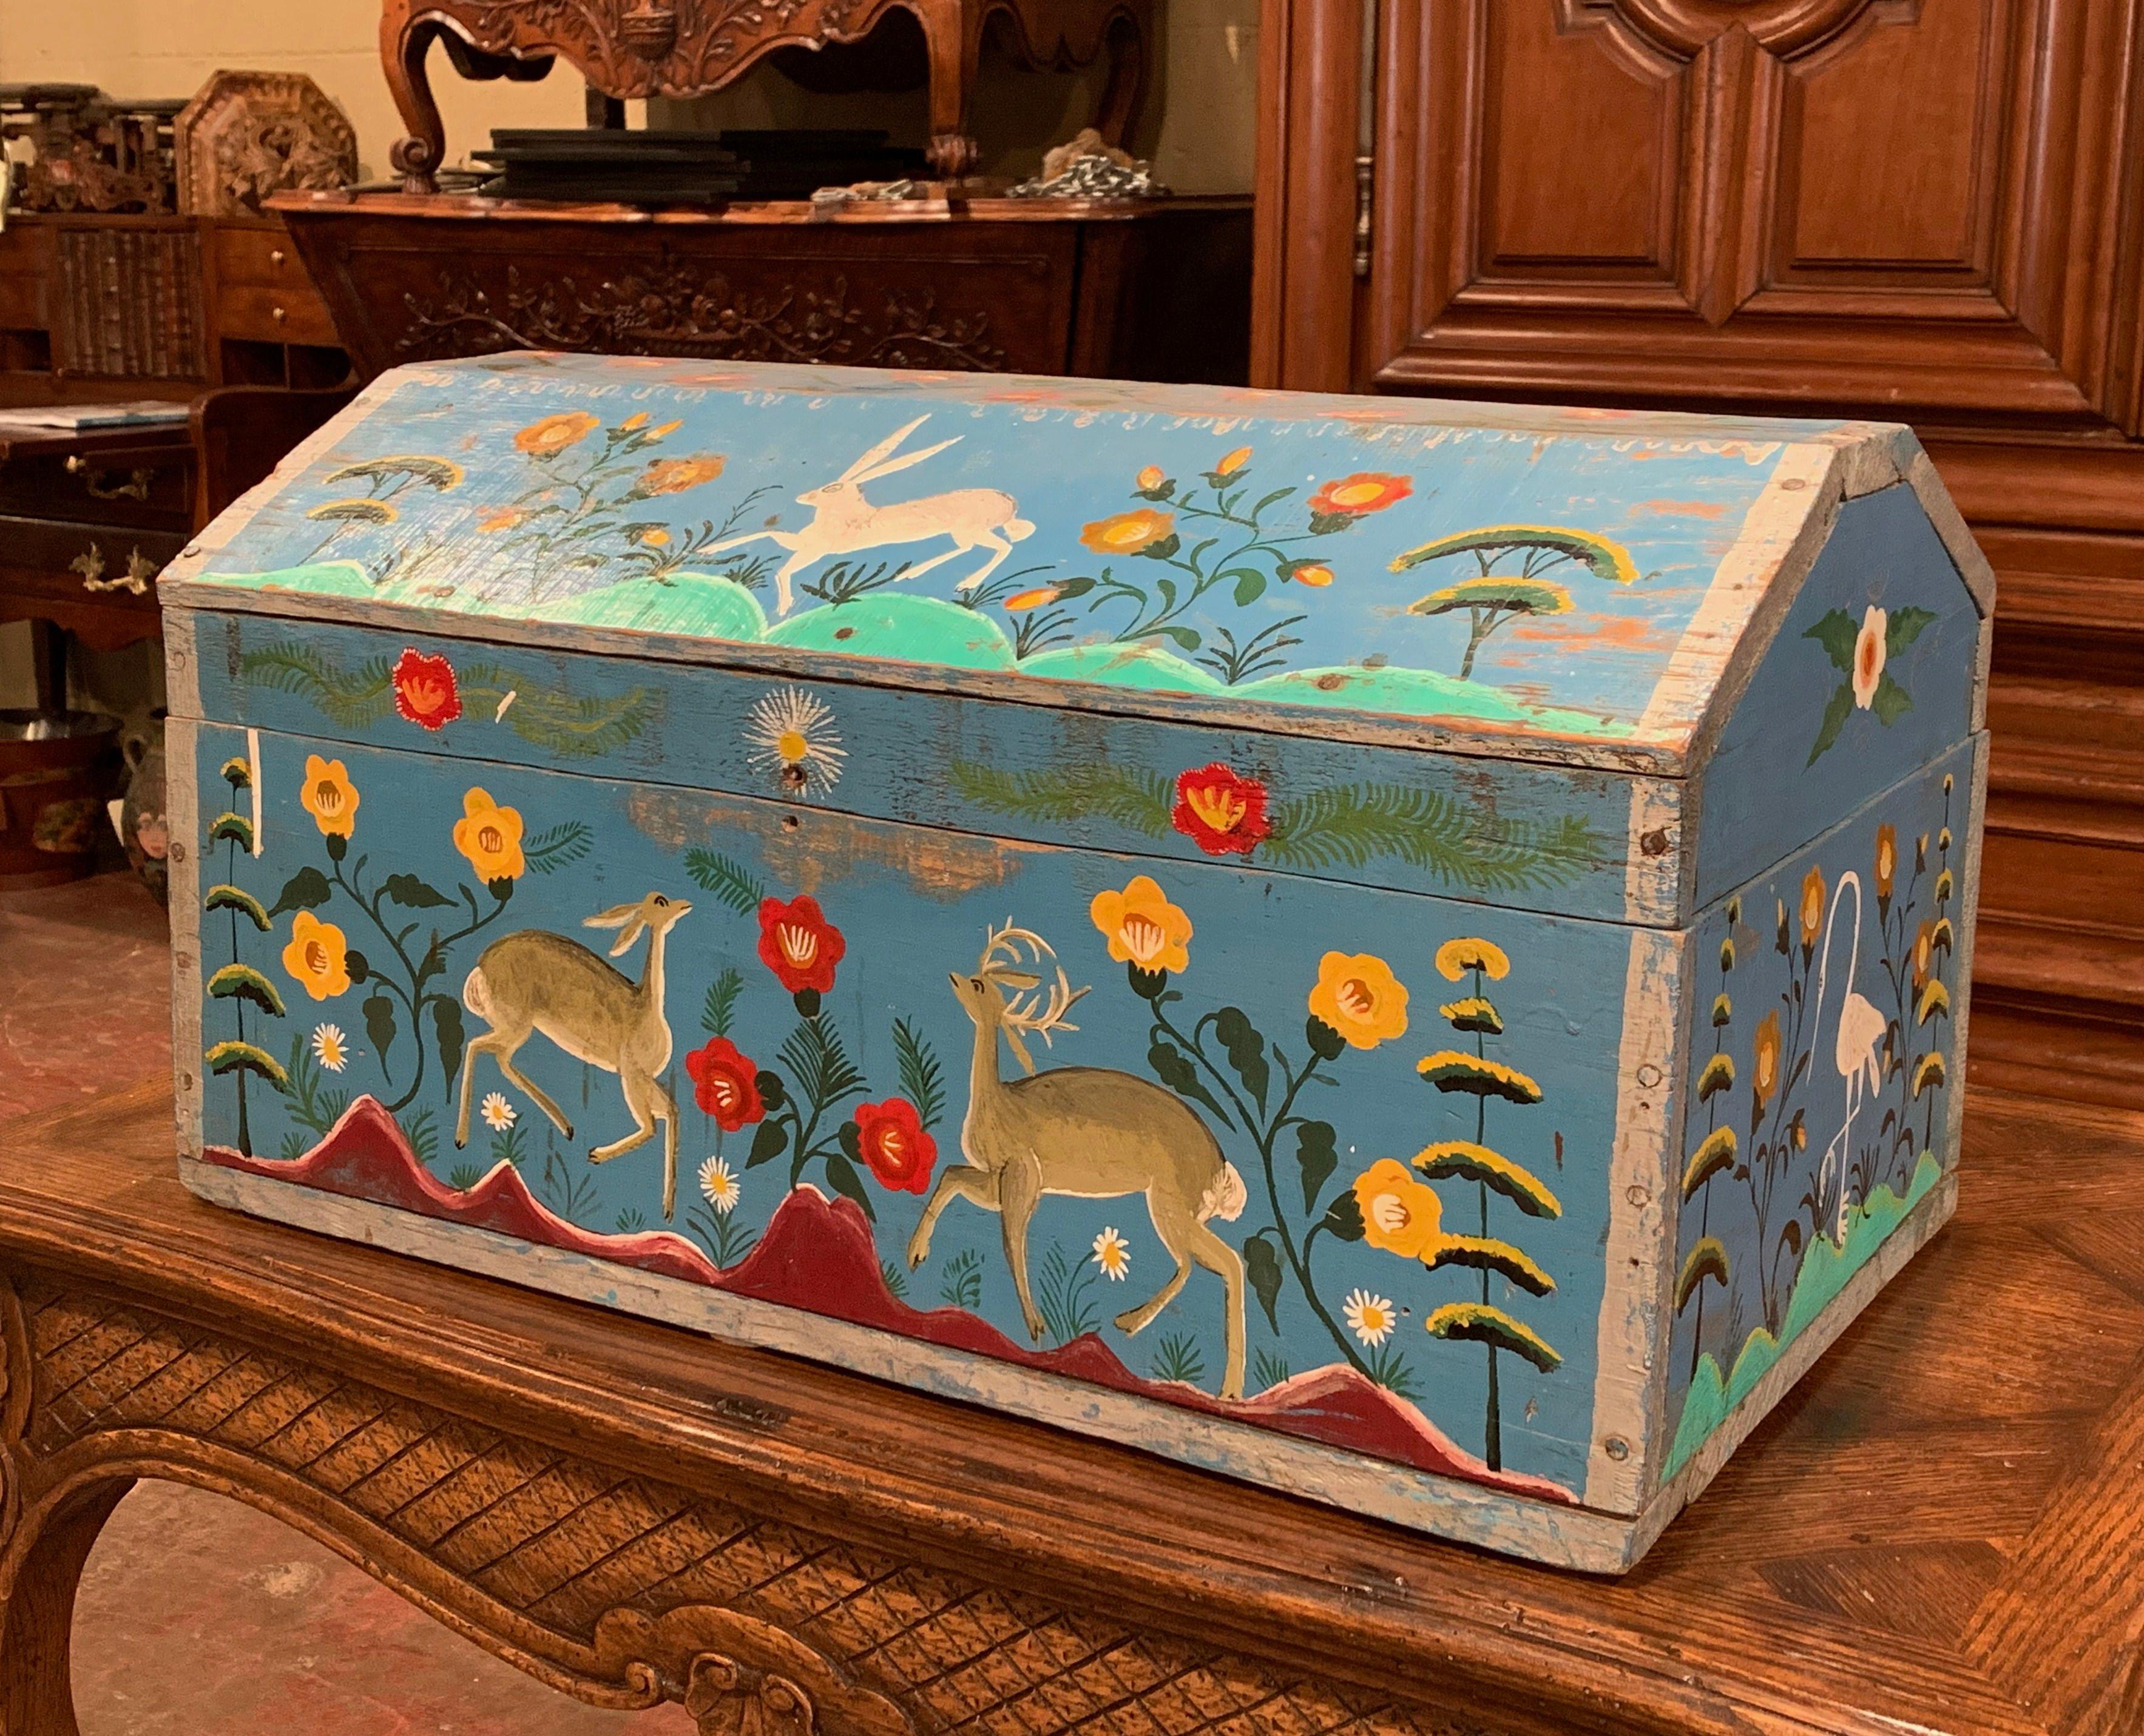 Hand-Painted 19th Century French Hand Painted Trunk with Rabbit and Deer Motifs from Normandy